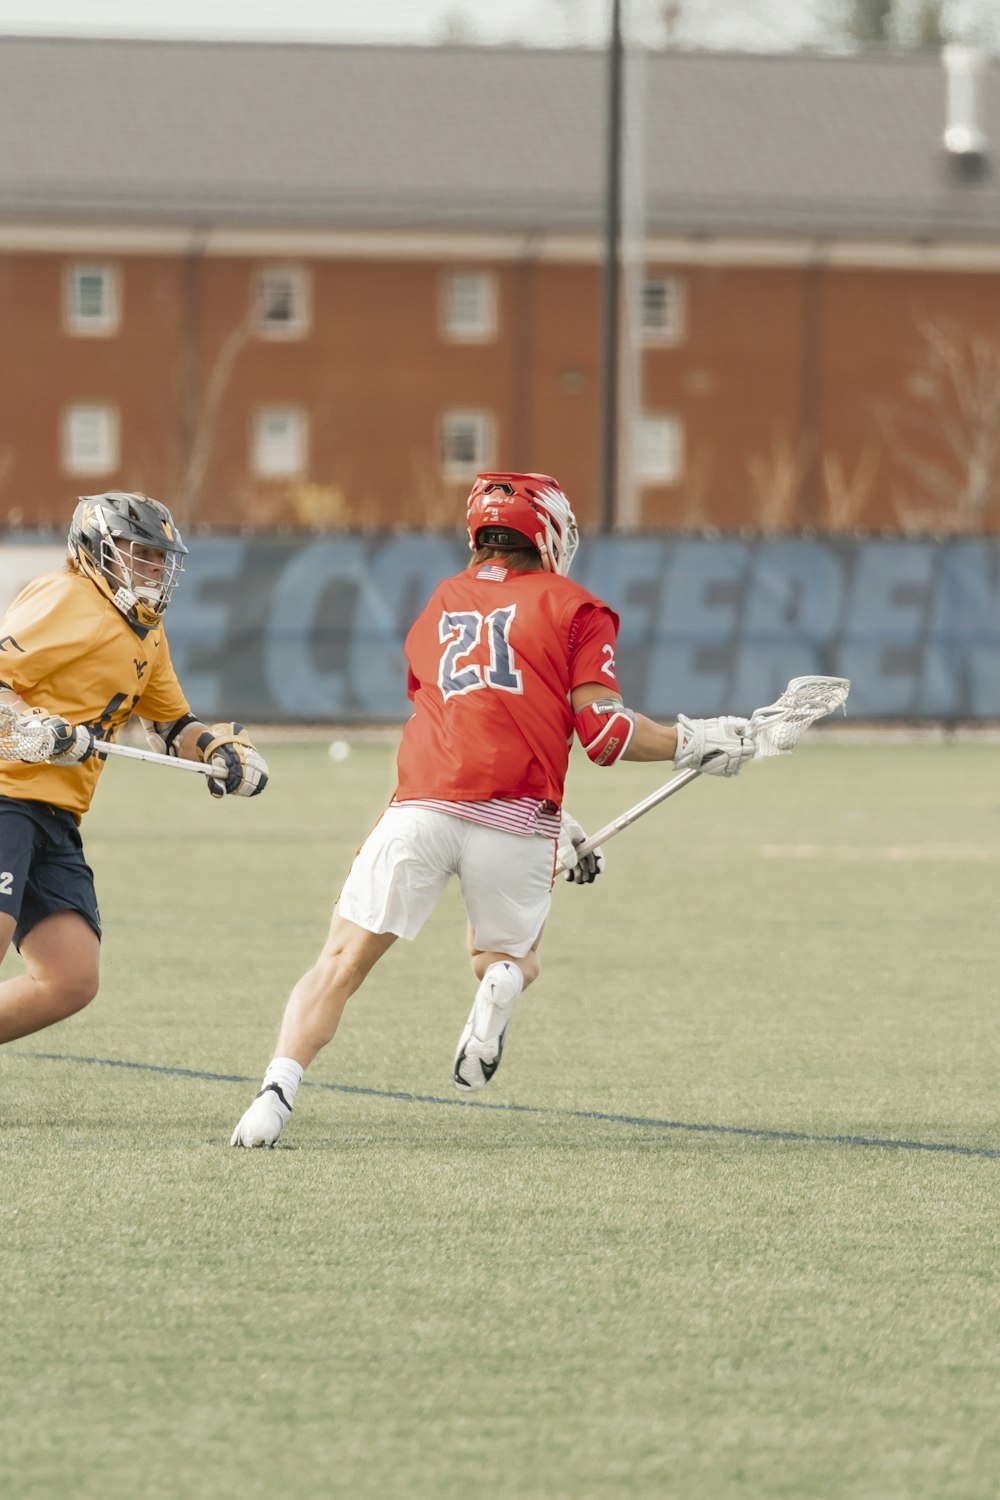 a couple of men playing a game of lacrosse